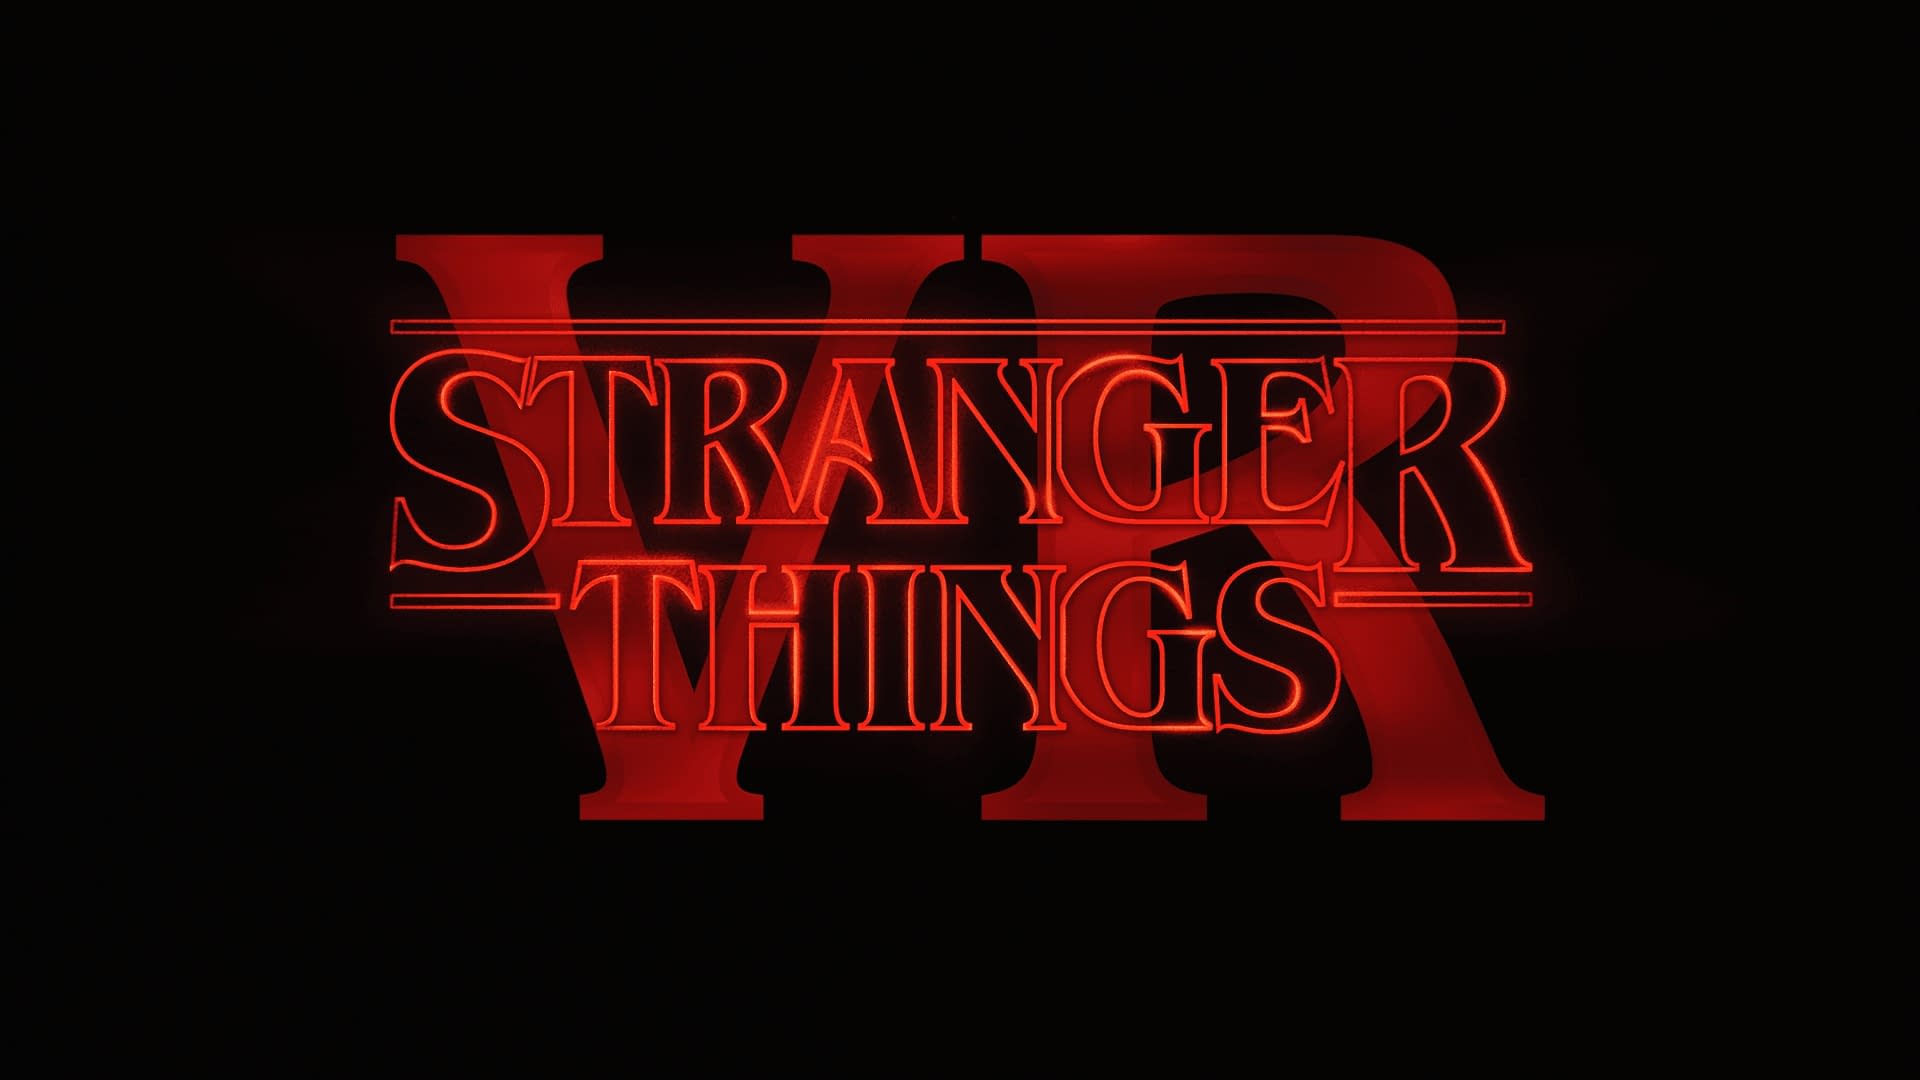 Stranger Things Announced for VR Virtual Reality Headsets